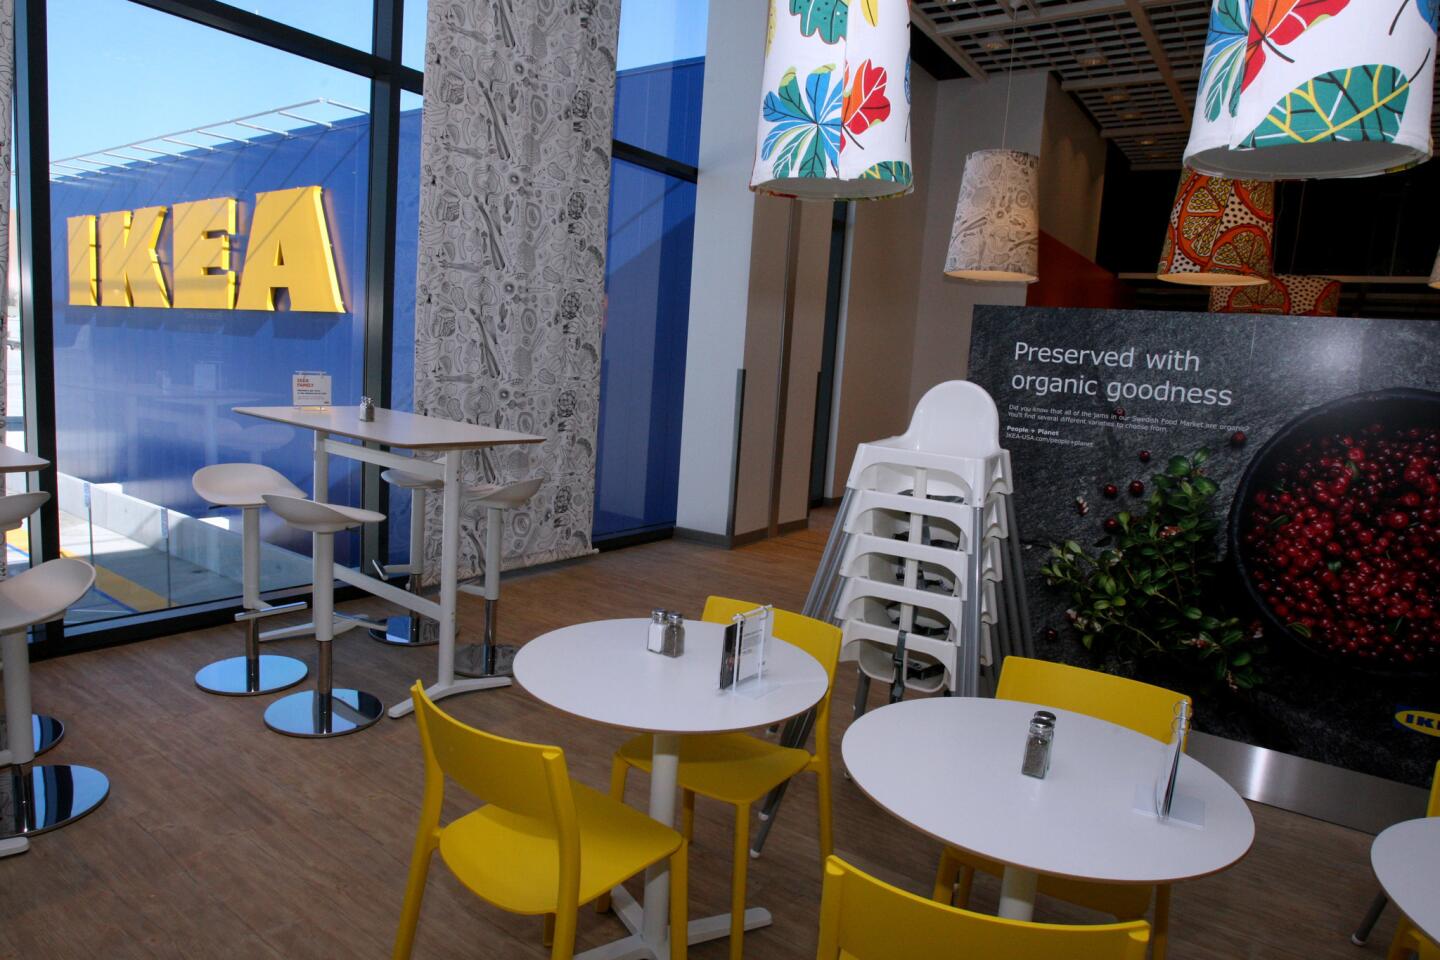 Photo Gallery: Largest Ikea store in the United States set to open February 8 in Burbank